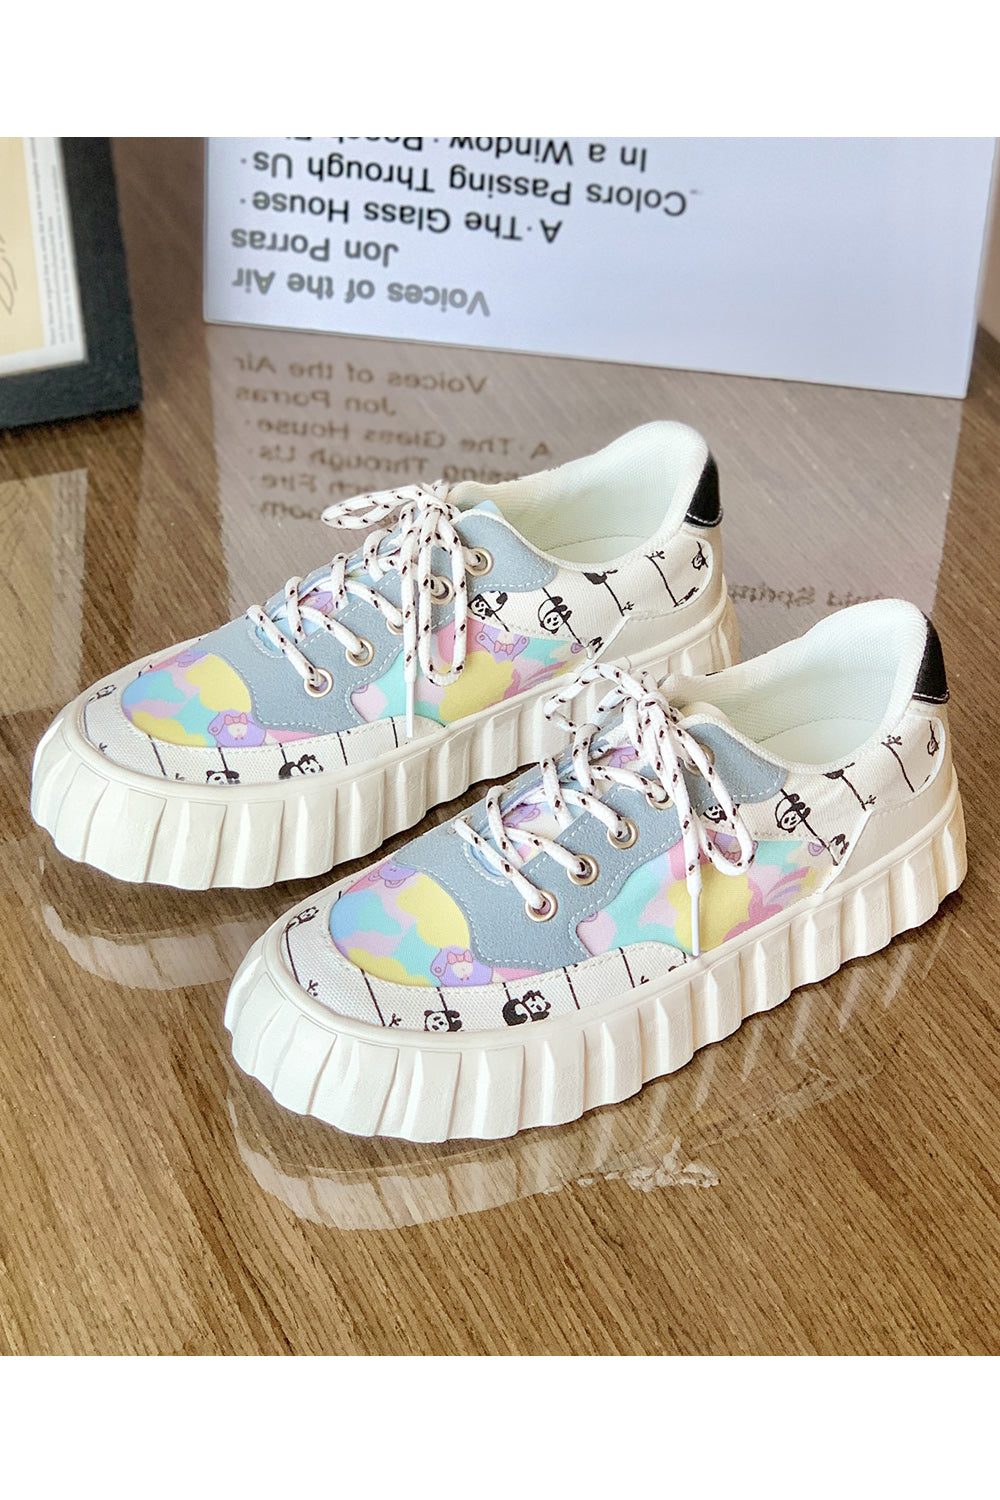 Women Thick Soled Printed Style Lace Up Casual Pretty Lightweight Sneaker Shoes